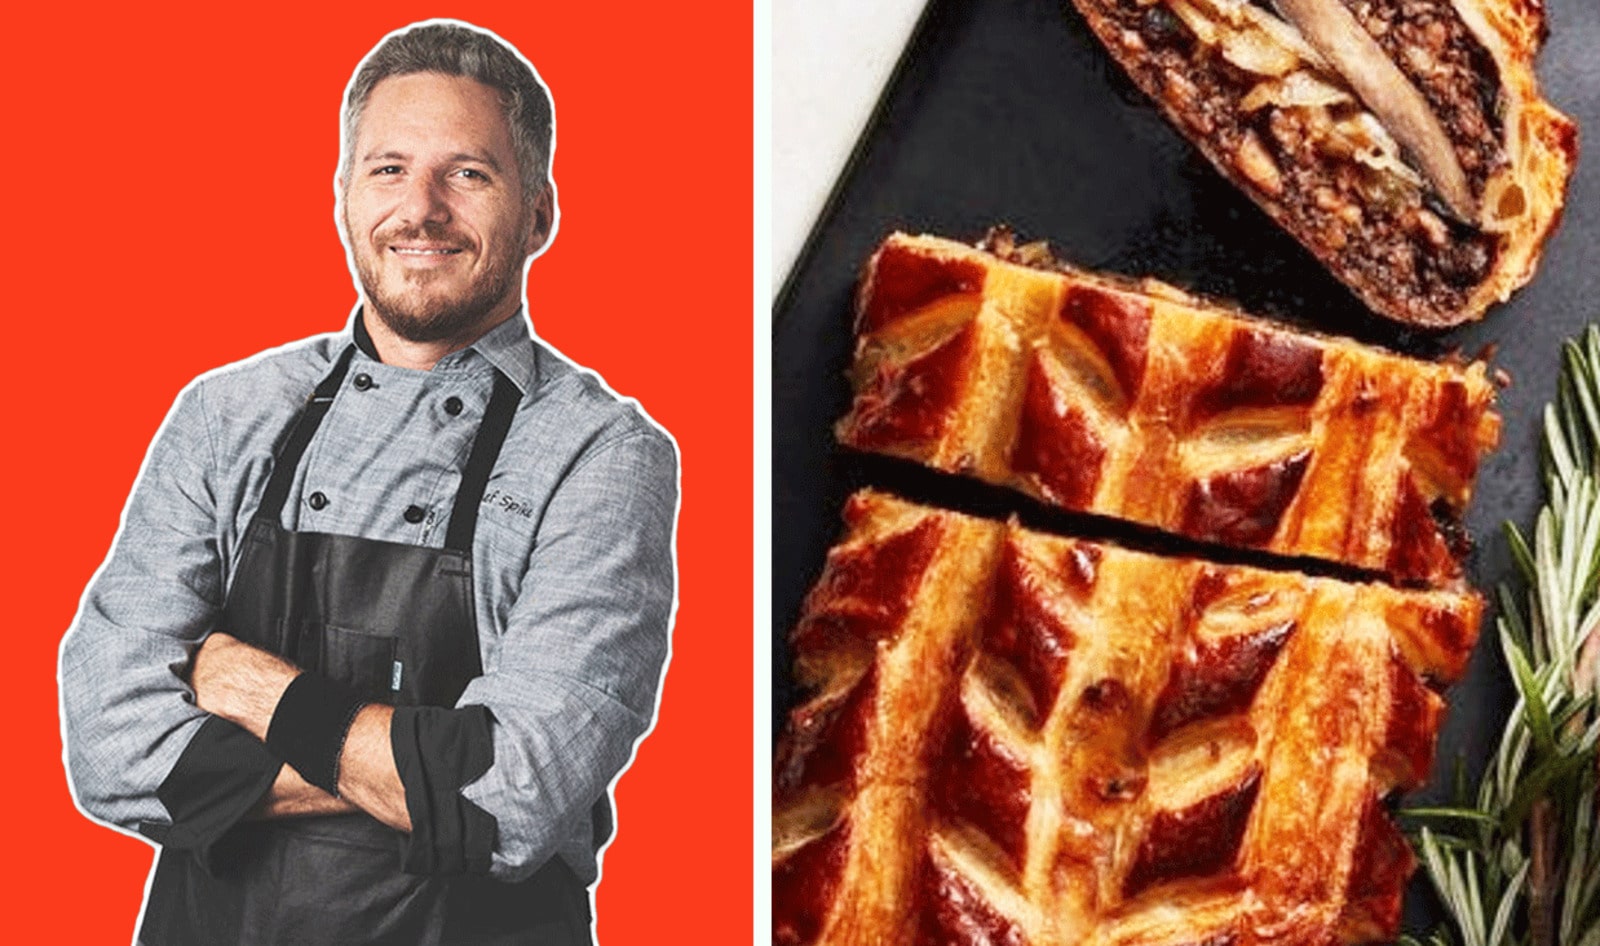 You Can Now Order&nbsp;<i>Top Chef</i> Alum Spike Mendelsohn’s Three-Course Vegan Meal for Christmas